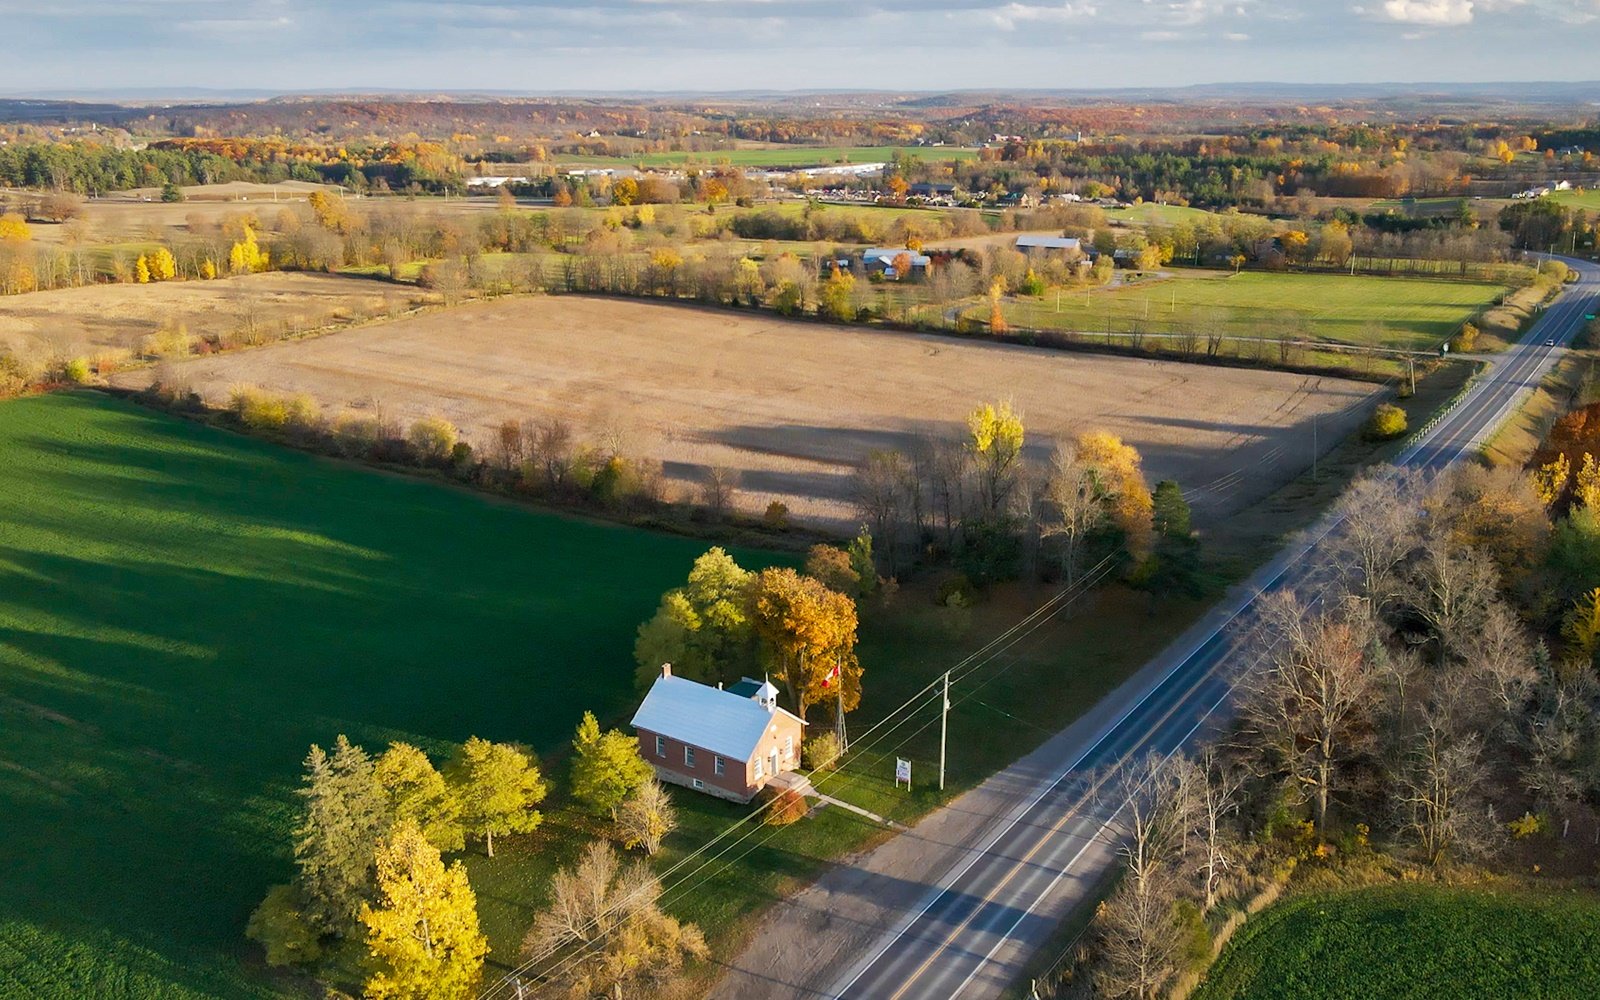 WestbenSchoolhouse_fromabove.jpg